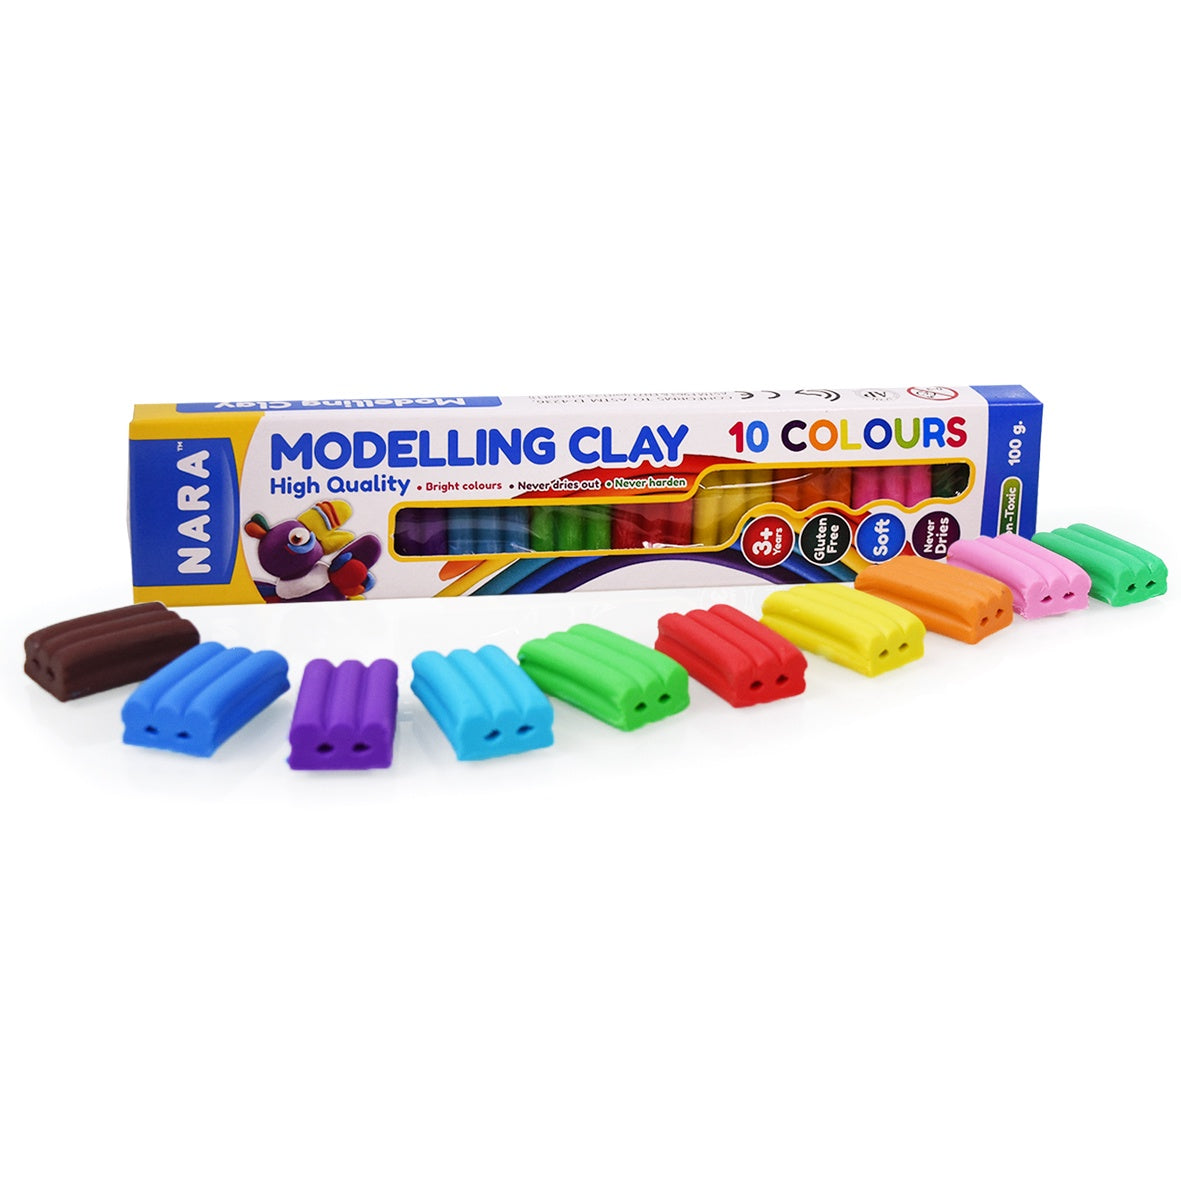 Nara Modelling Clay 10 Colour Pack